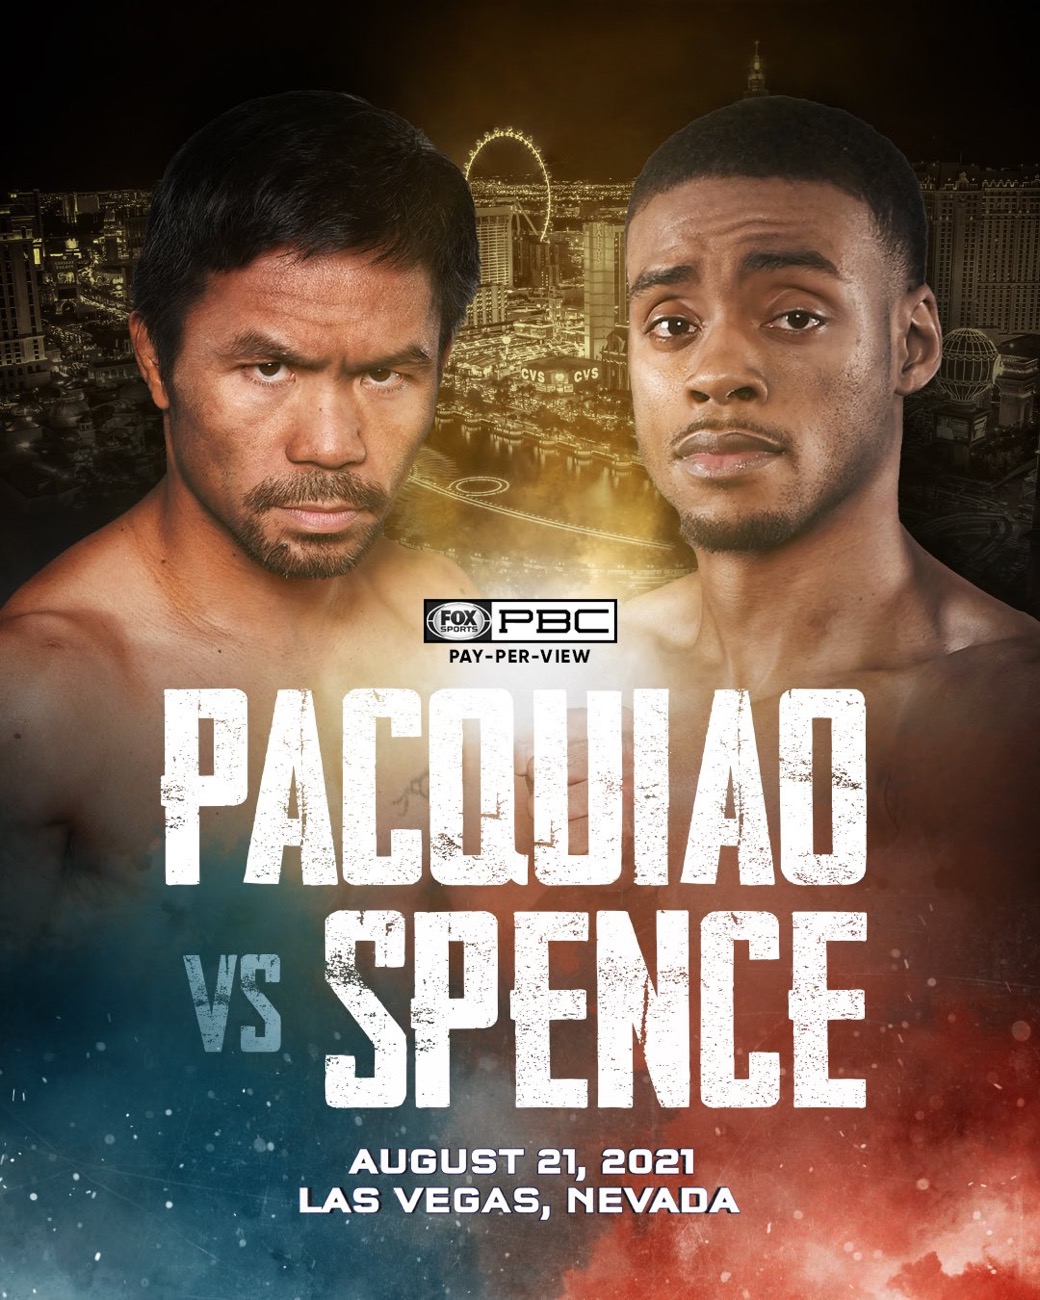 Andre Ward, Errol Spence Jr., Manny Pacquiao boxing image / photo